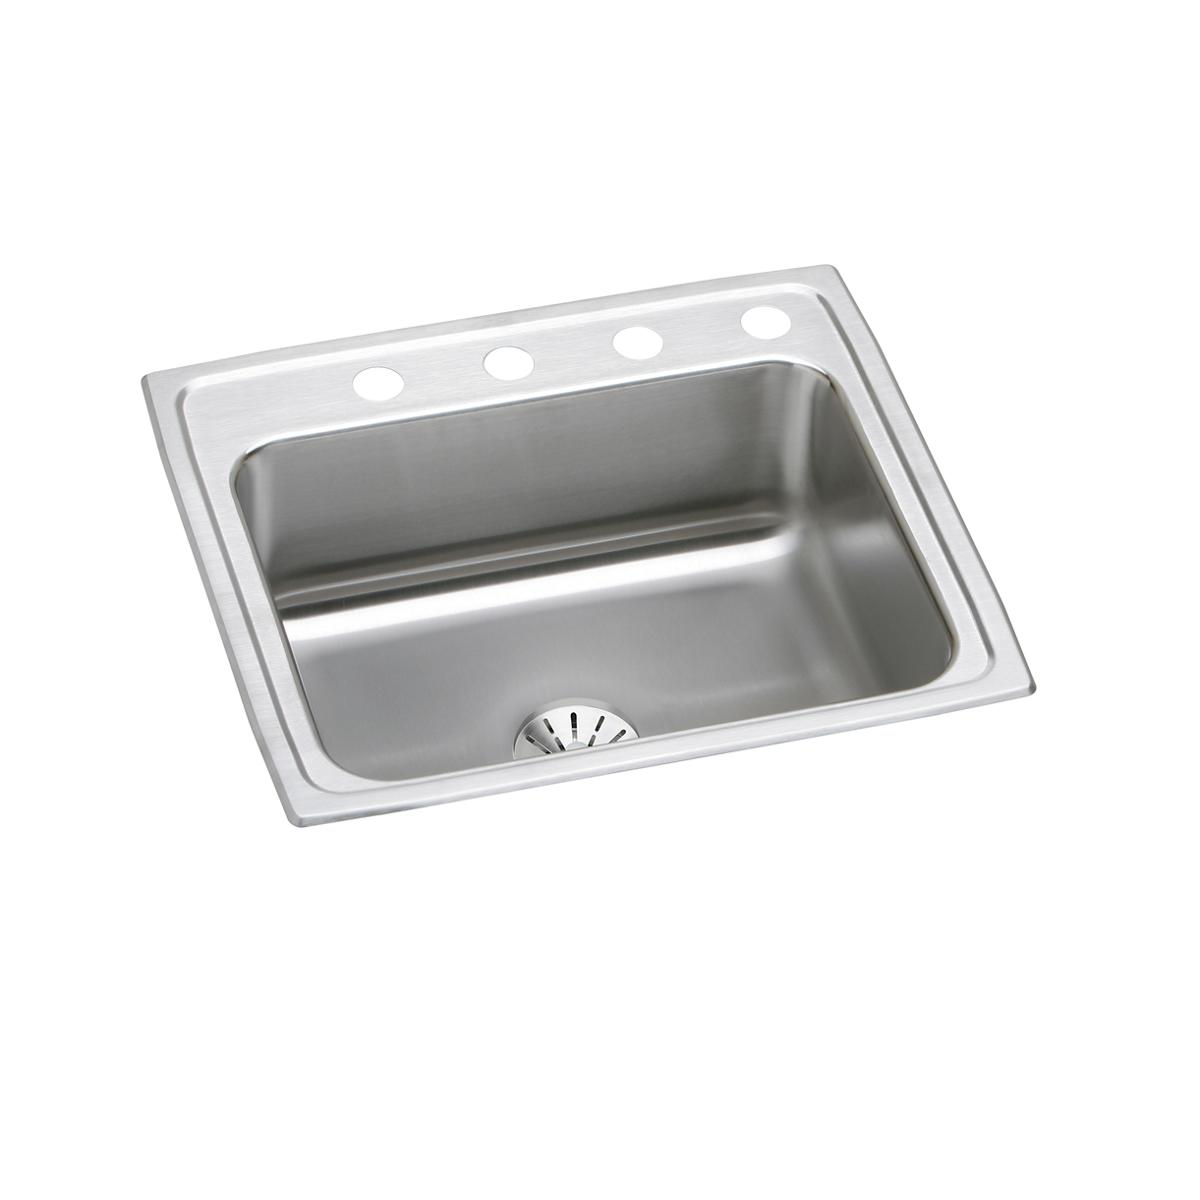 Elkay Lustertone Classic 25" x 21-1/4" x 7-7/8" MR2-Hole Single Bowl Drop-in Sink with Perfect Drain